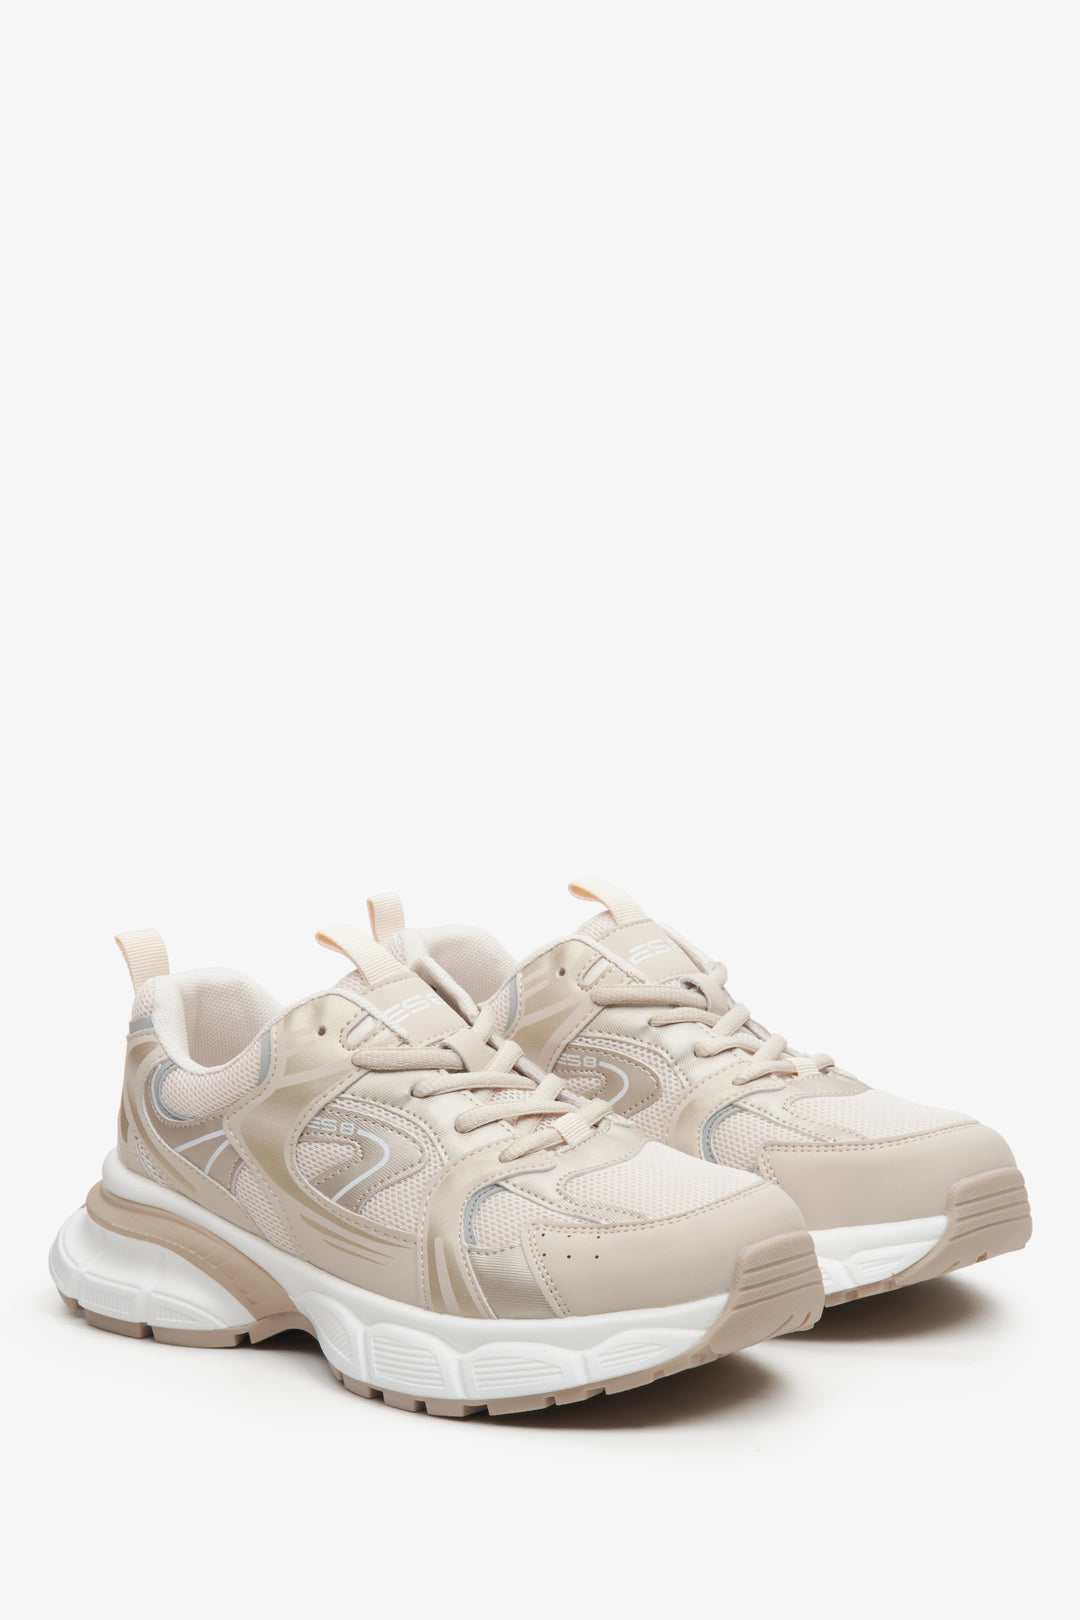 Women's beige and white ES 8 sneakers with golden embellishments.